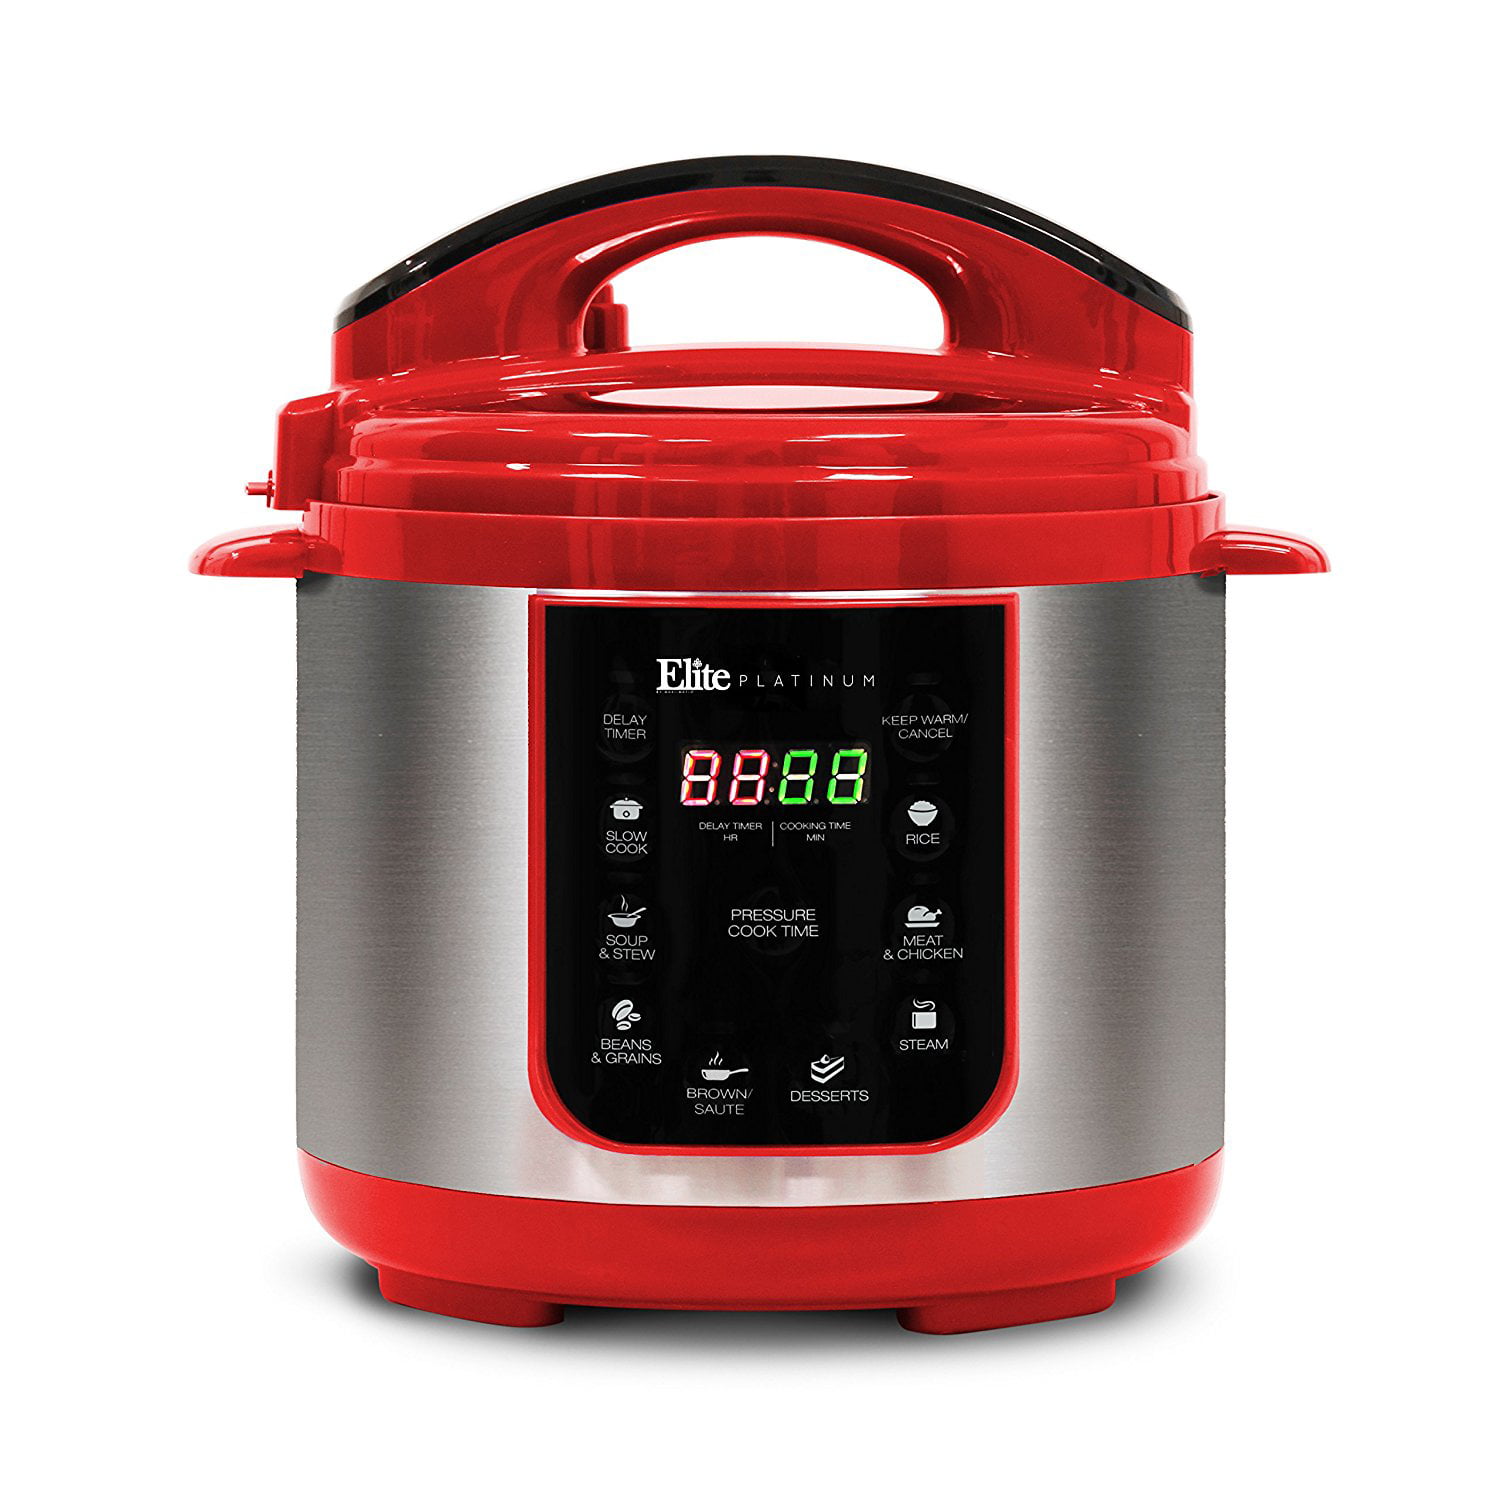 How To Use A 10-Quart Electric Pressure Cooker By Elite By Maxi-Matic